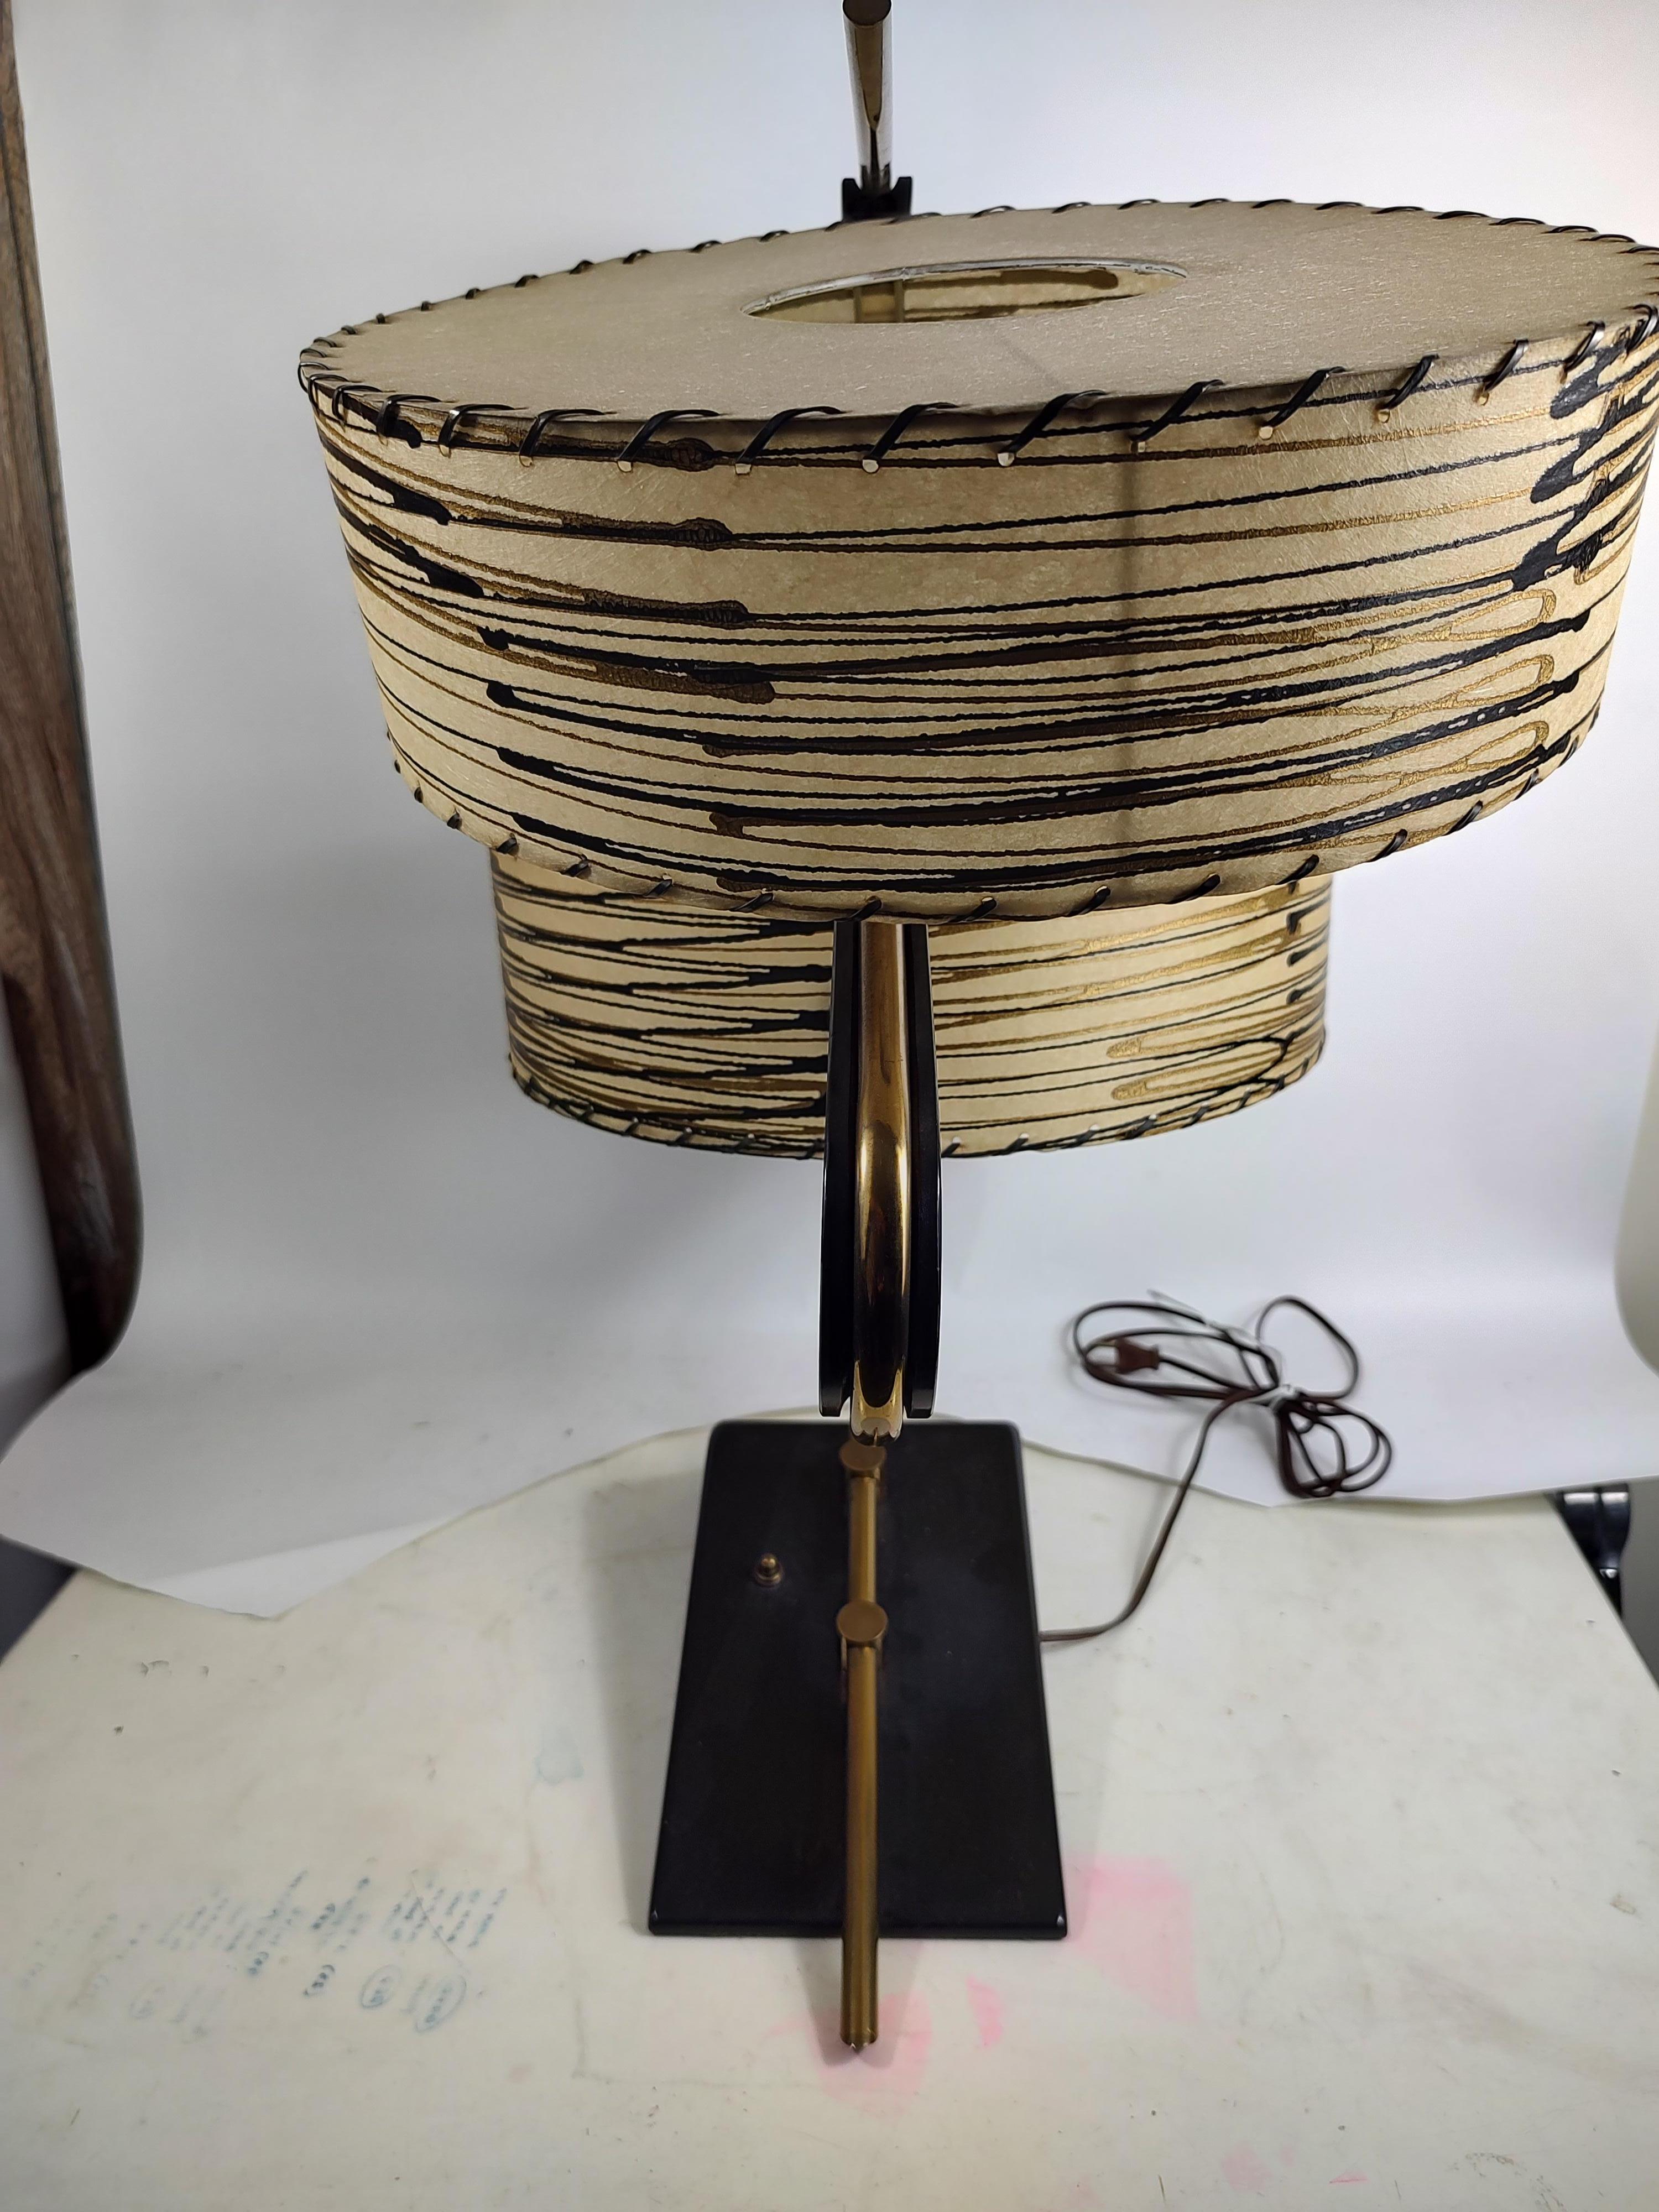 American Mid-Century Modern Table Lamp with Tambourine Shades by Majestic Lamp Co.